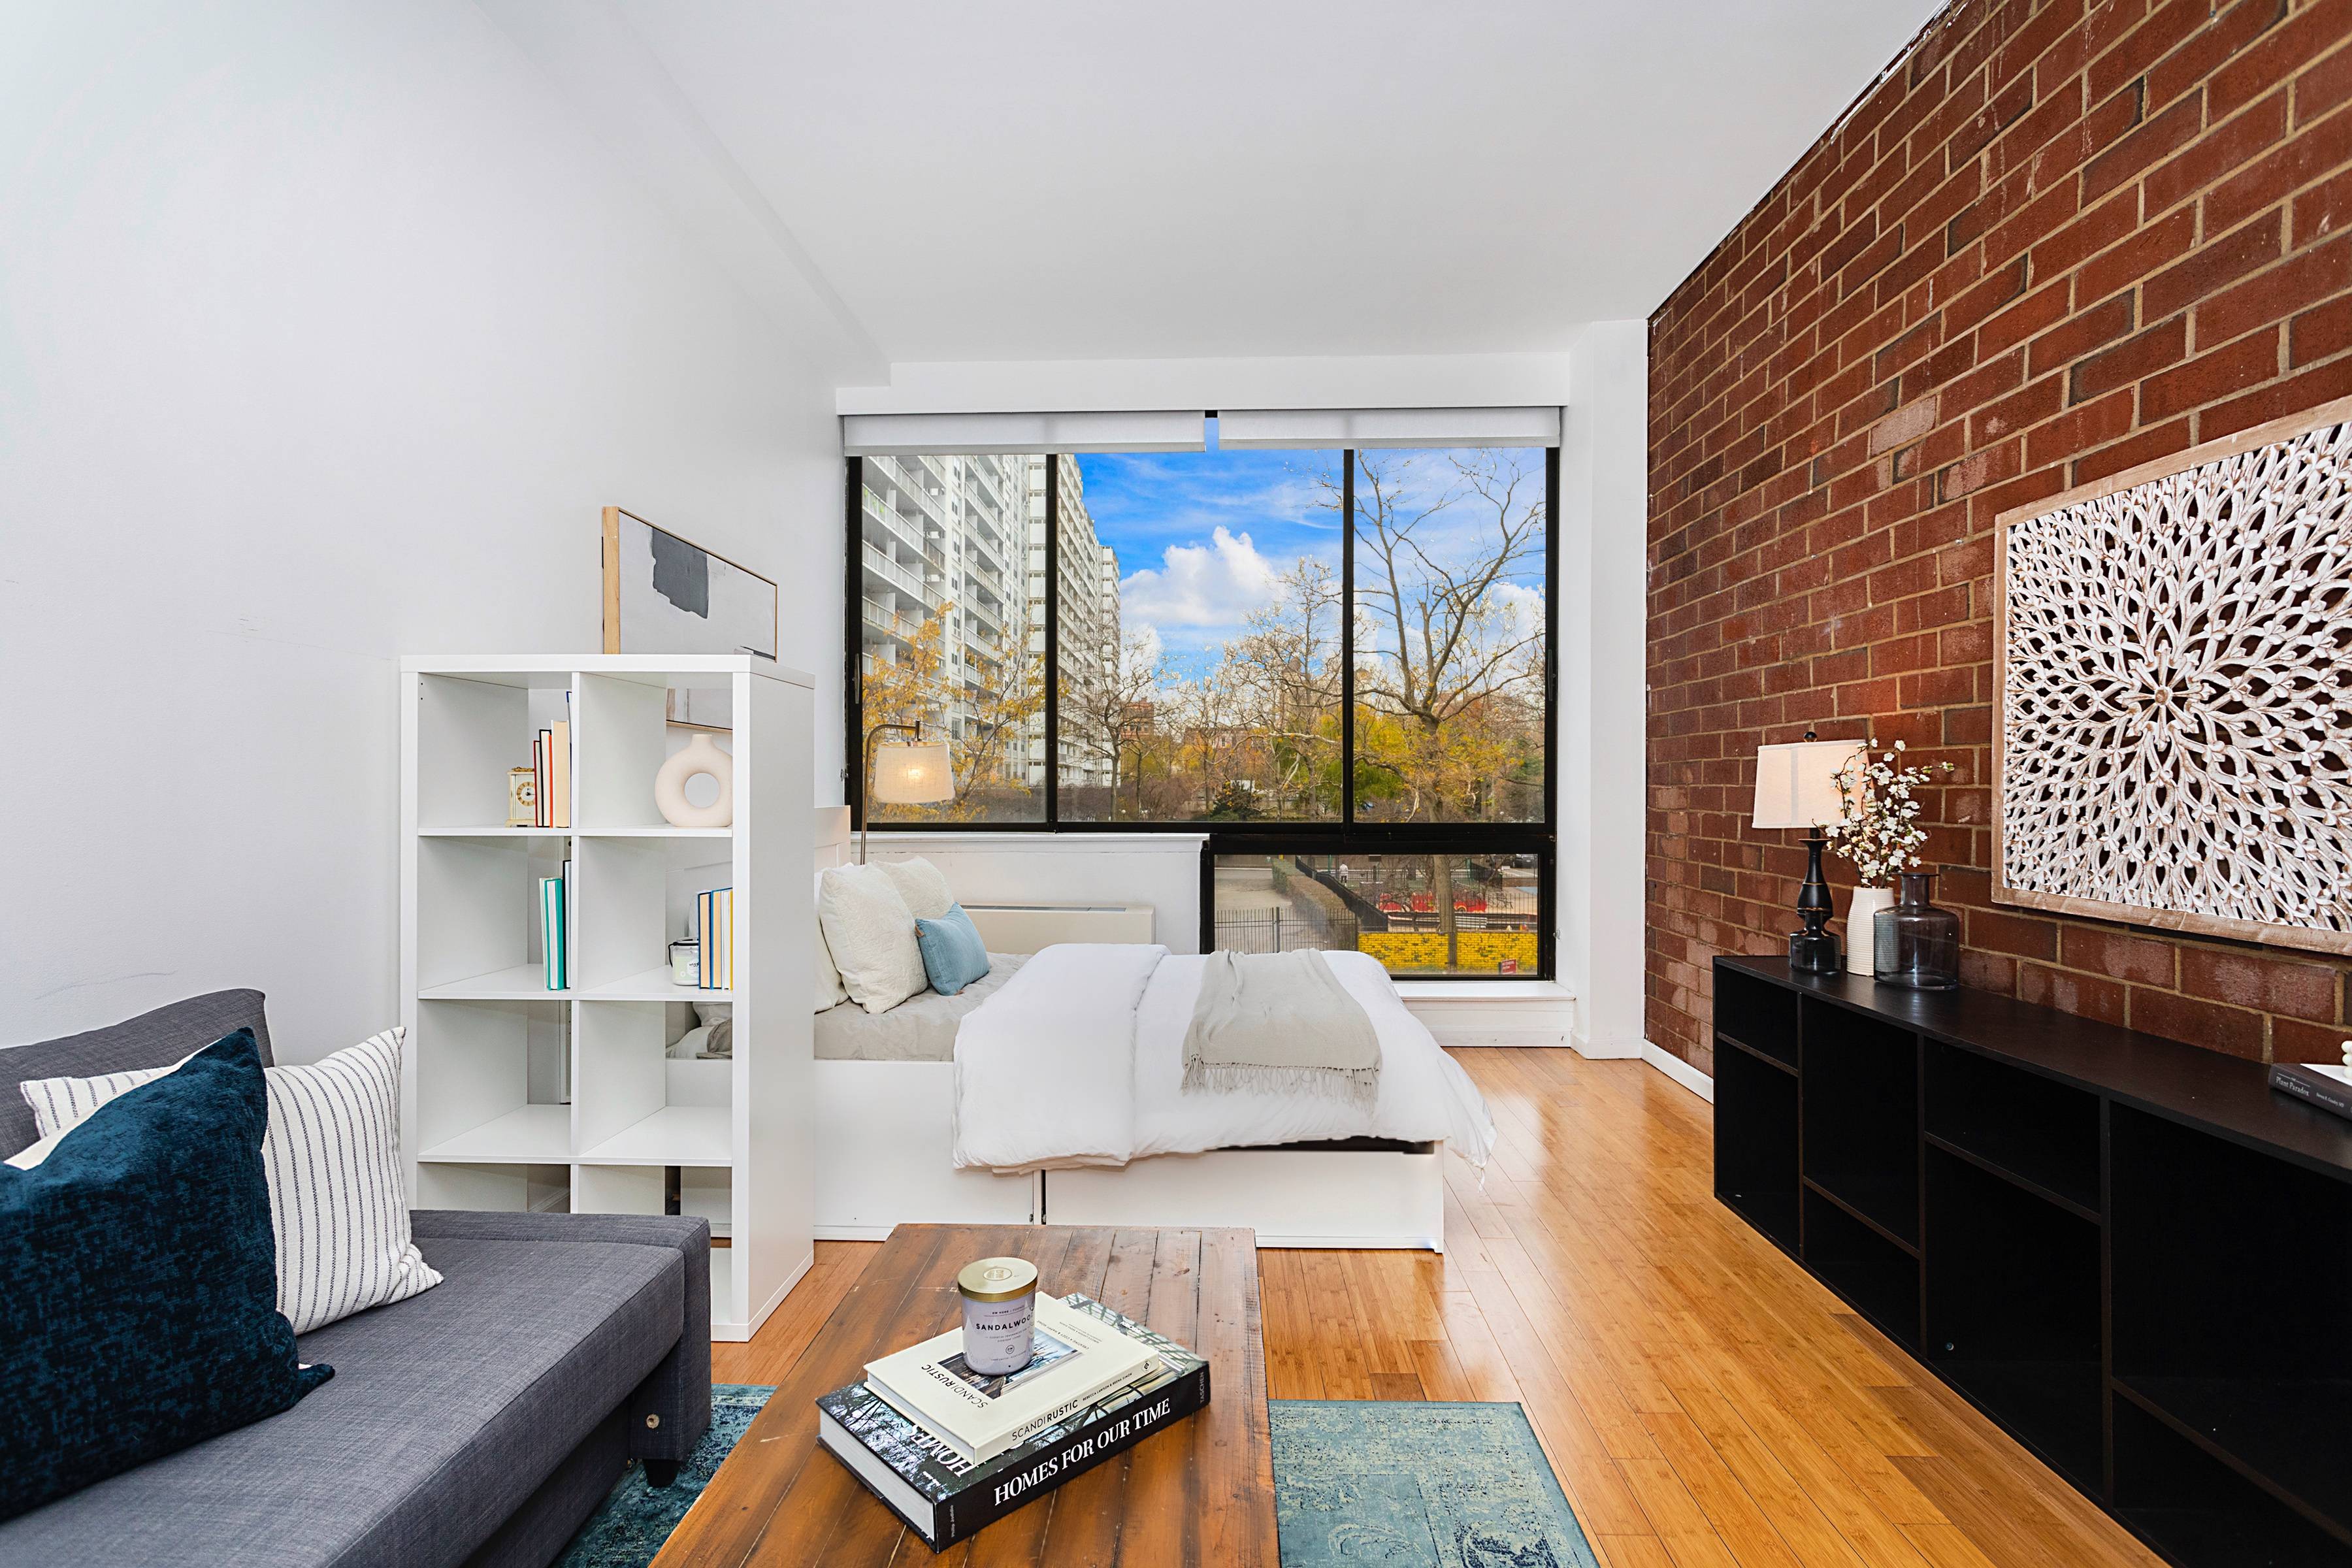 Welcome to this open and airy loft like studio located in the heart of Greenwich Village.